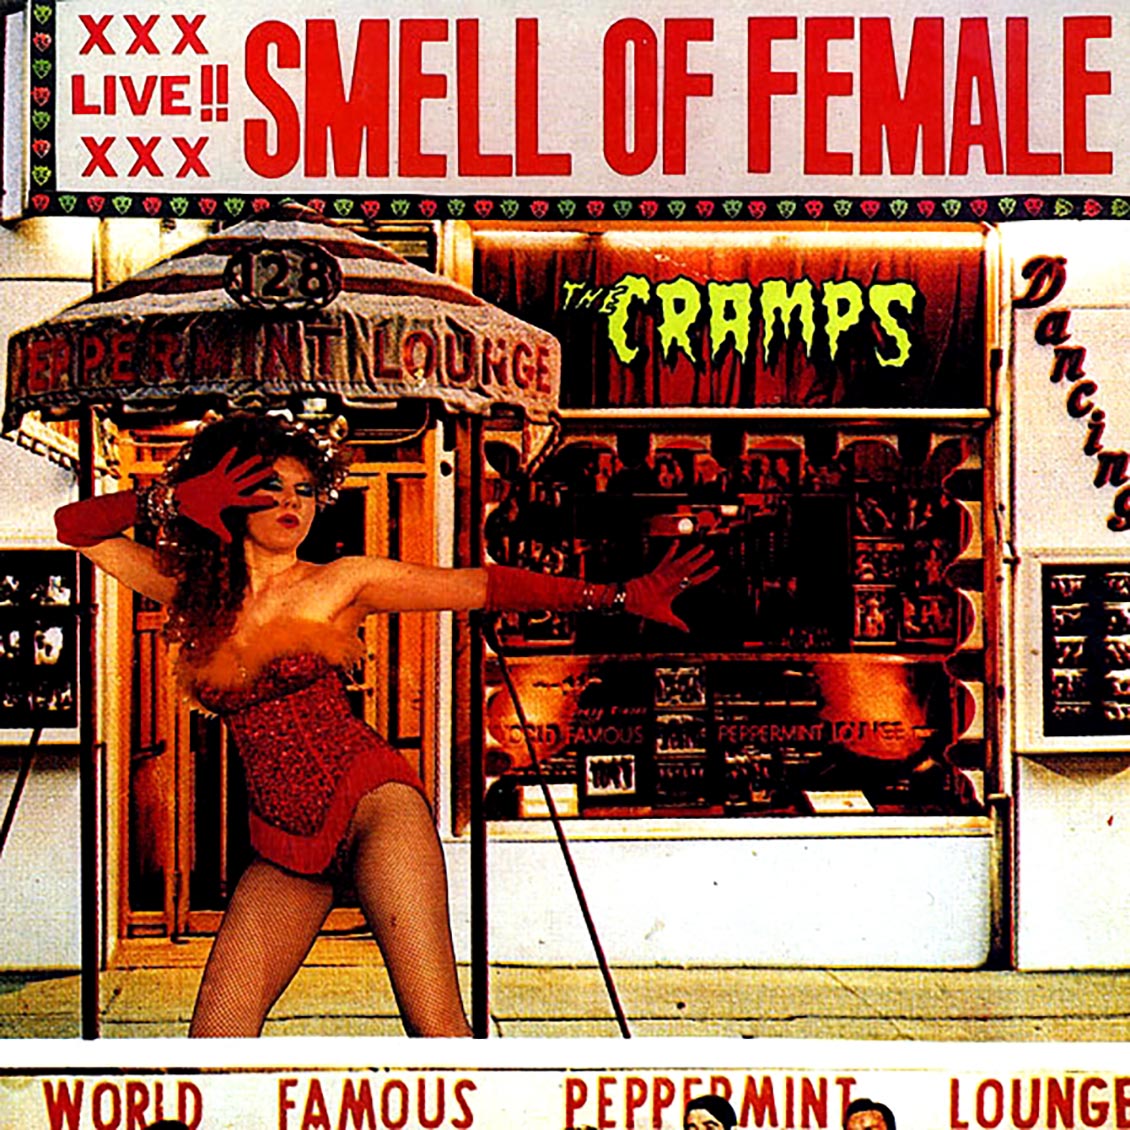 The Cramps - Smell Of Female - Vinyl LP